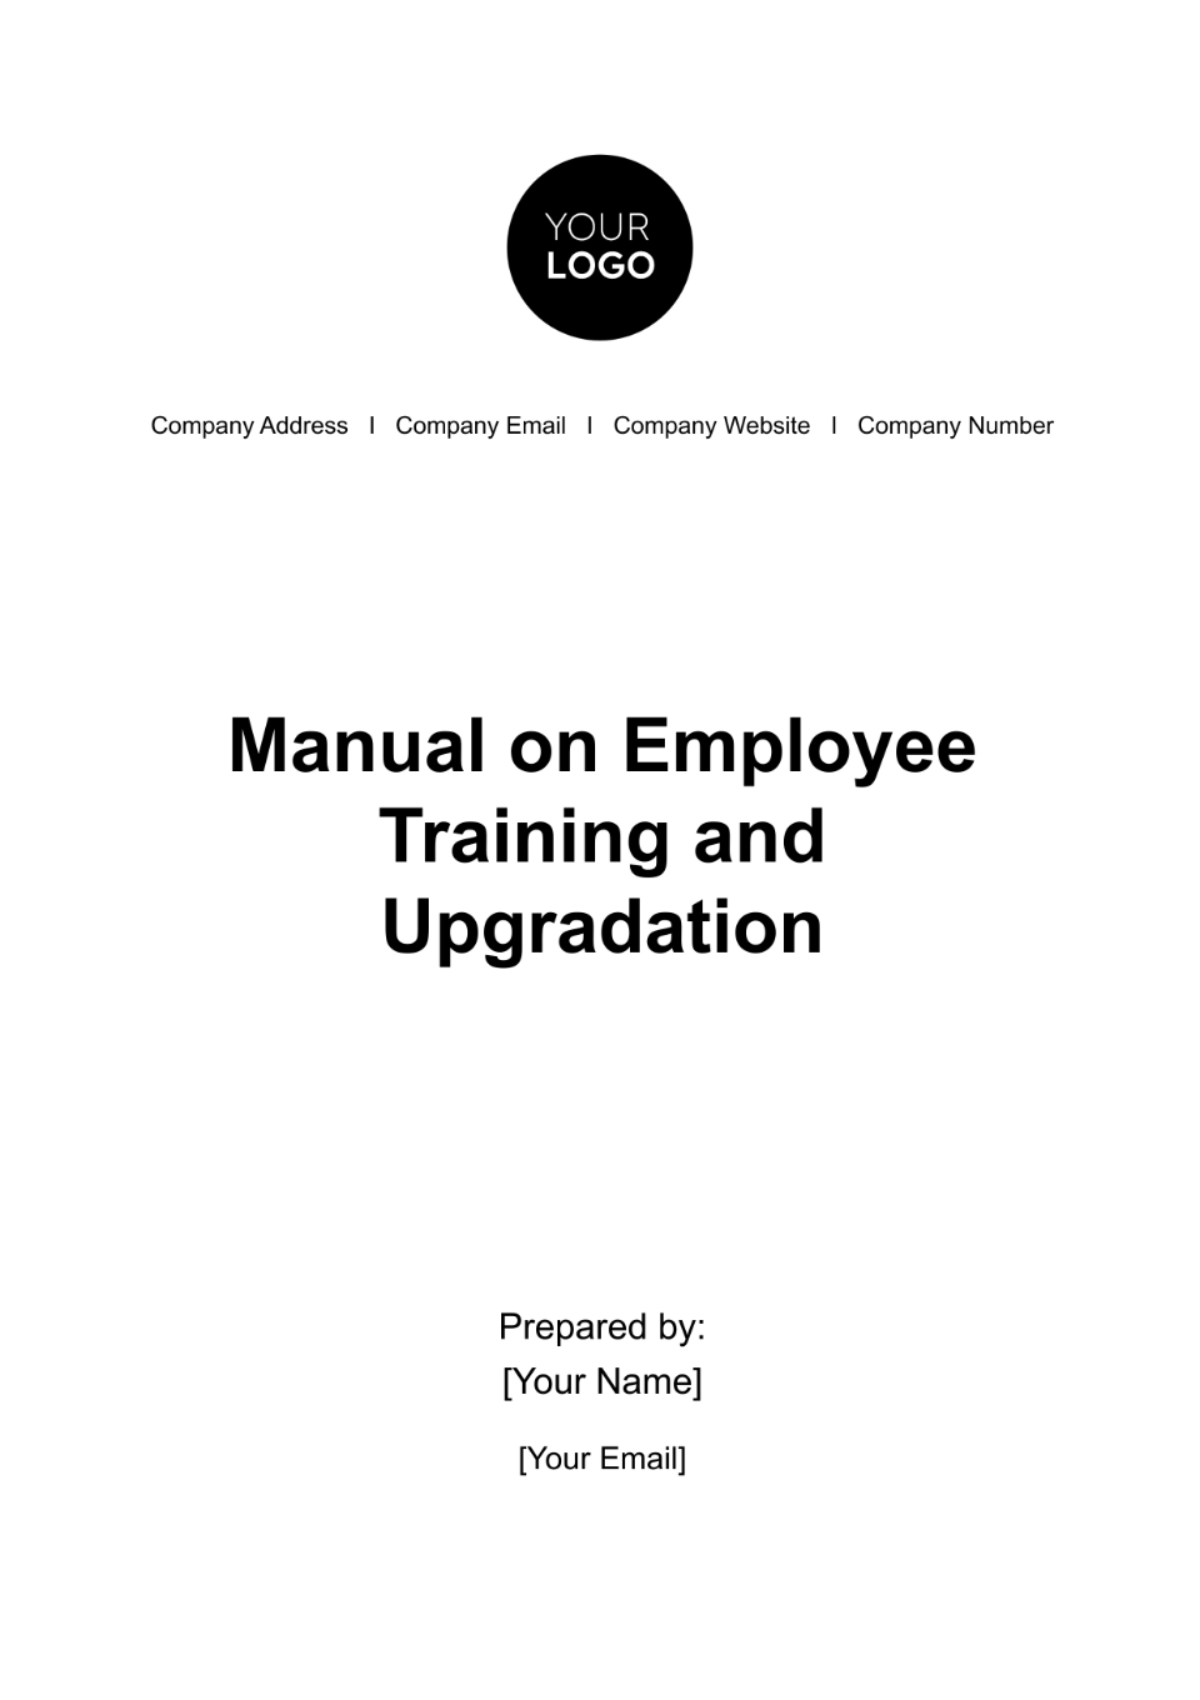 Free Manual on Employee Training and Upgradation HR Template